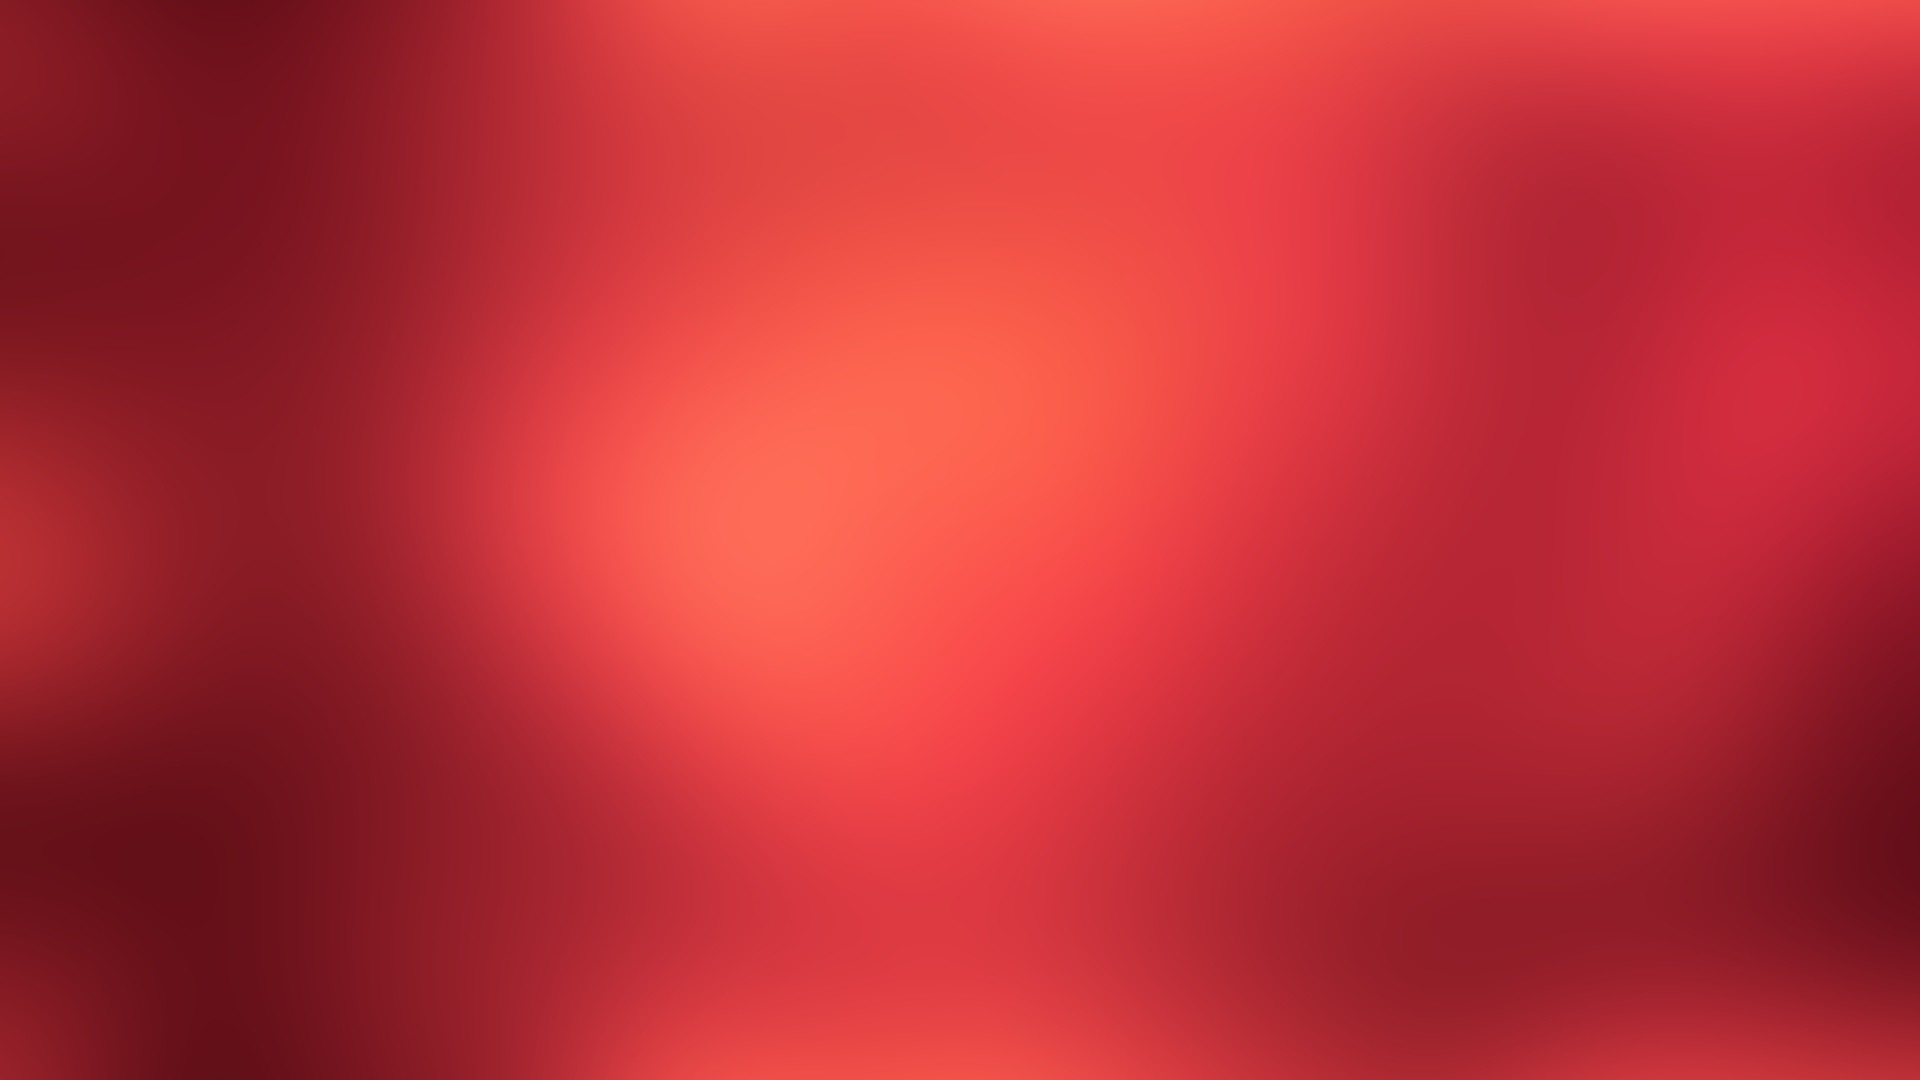 Download Wallpaper solid, red, bright, shiny Full HD 1080p .